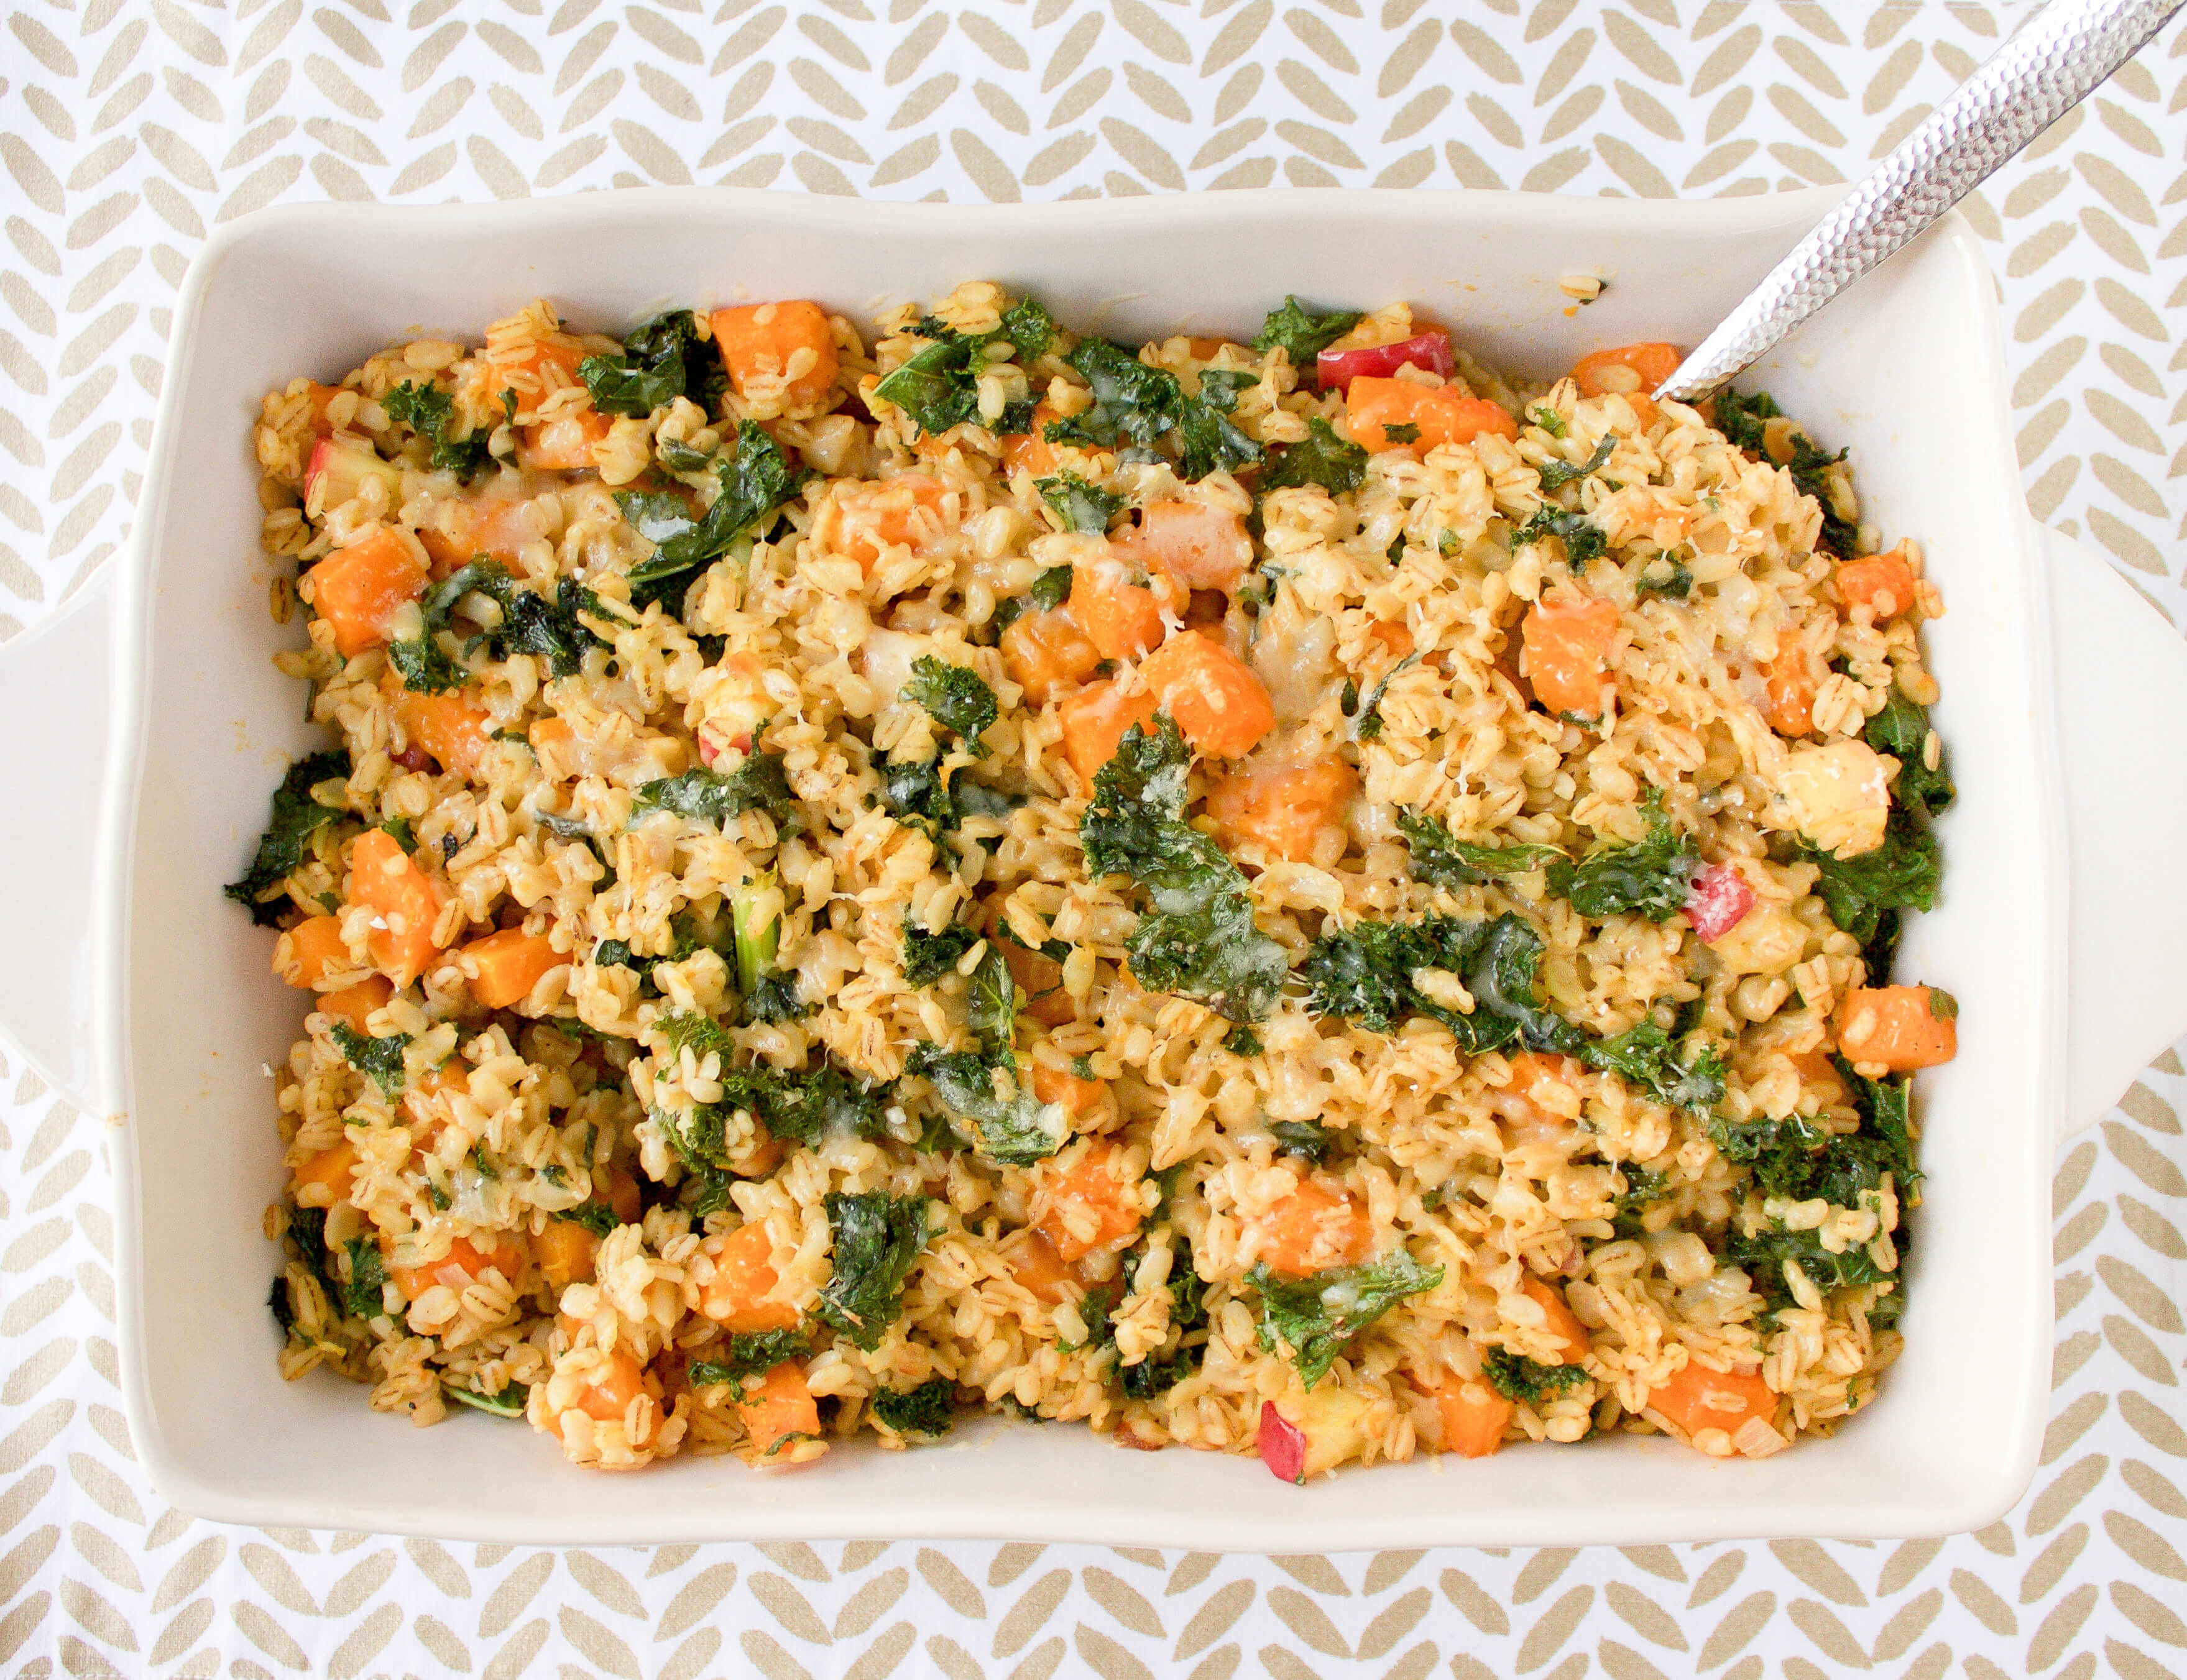 Barley Stuffing with Butternut Squash, Apples, and Kale